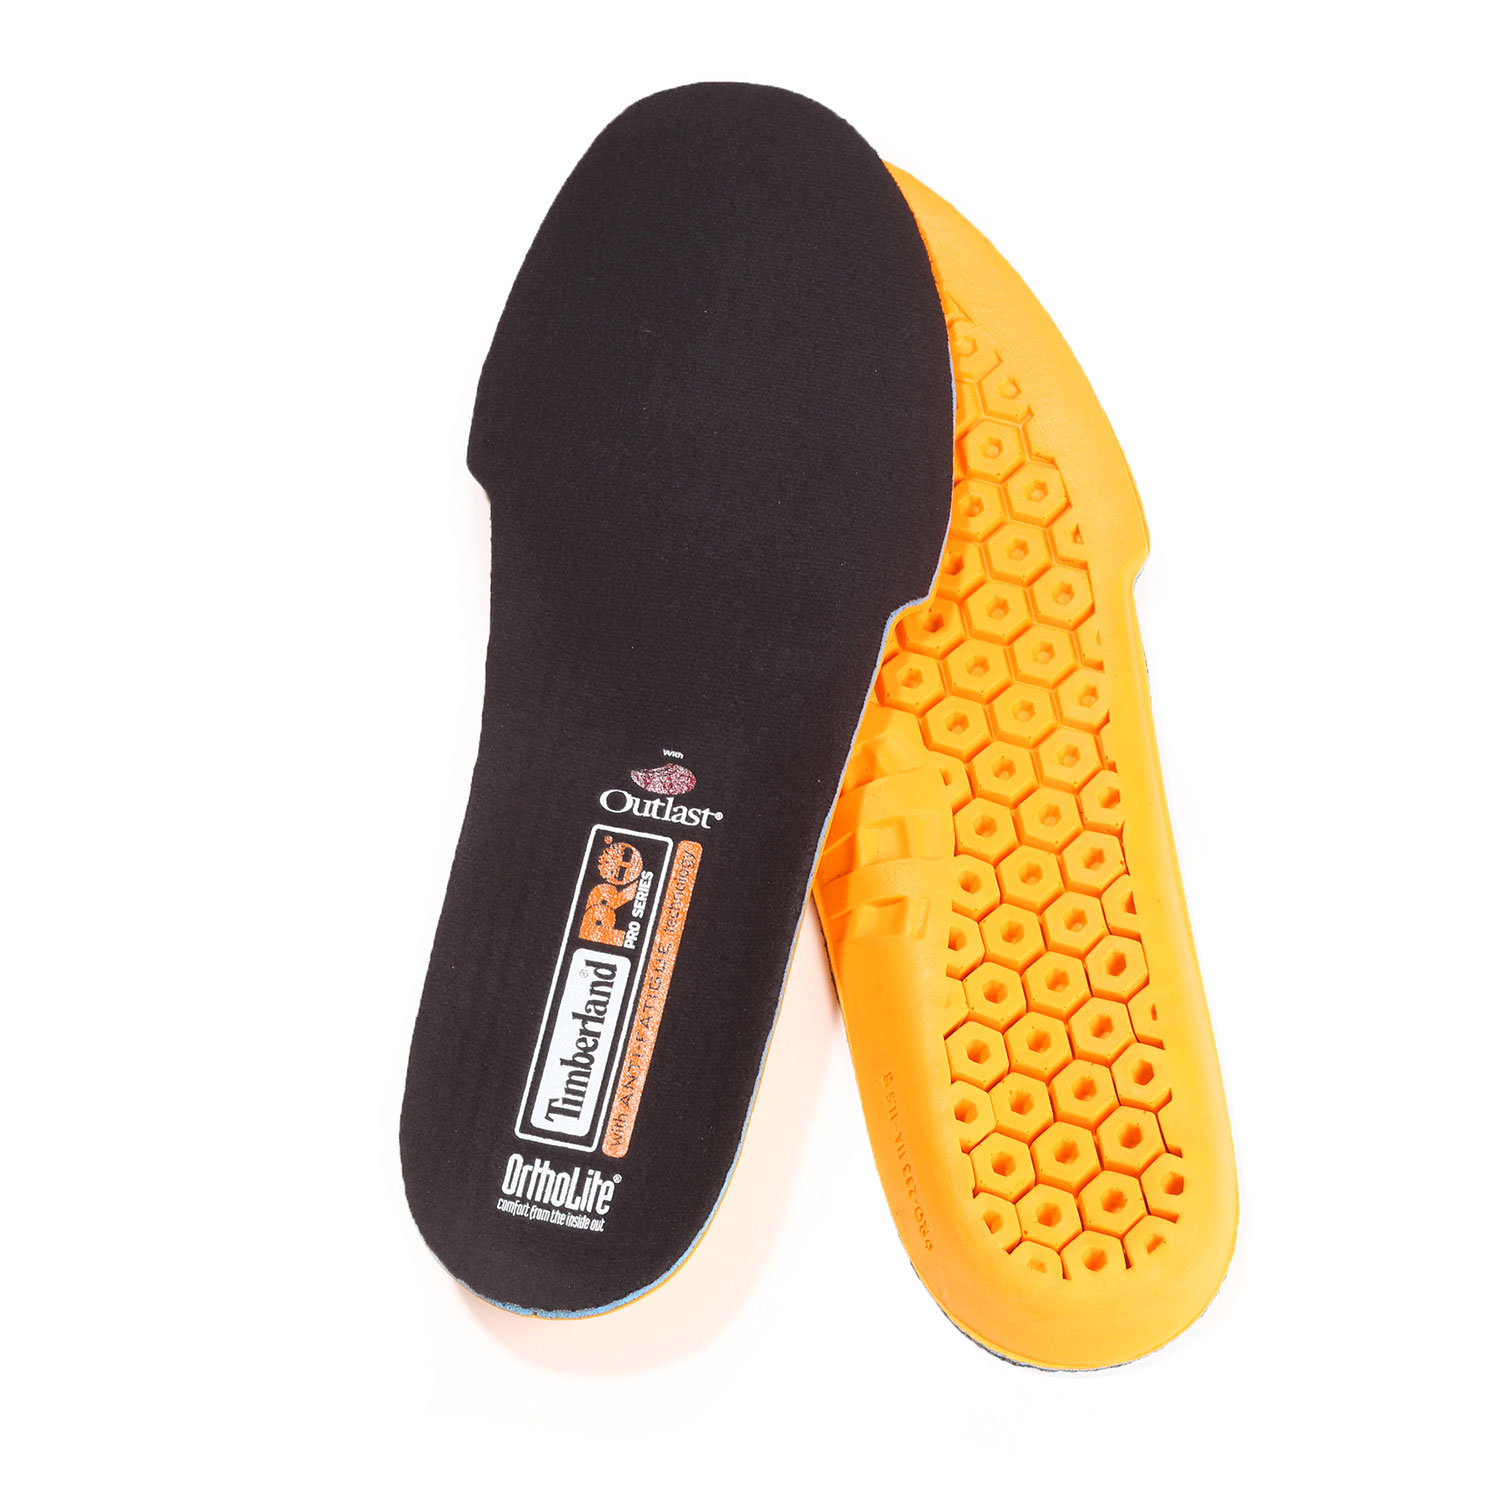 Timberland Pro Anti Fatigue Replacement Insole